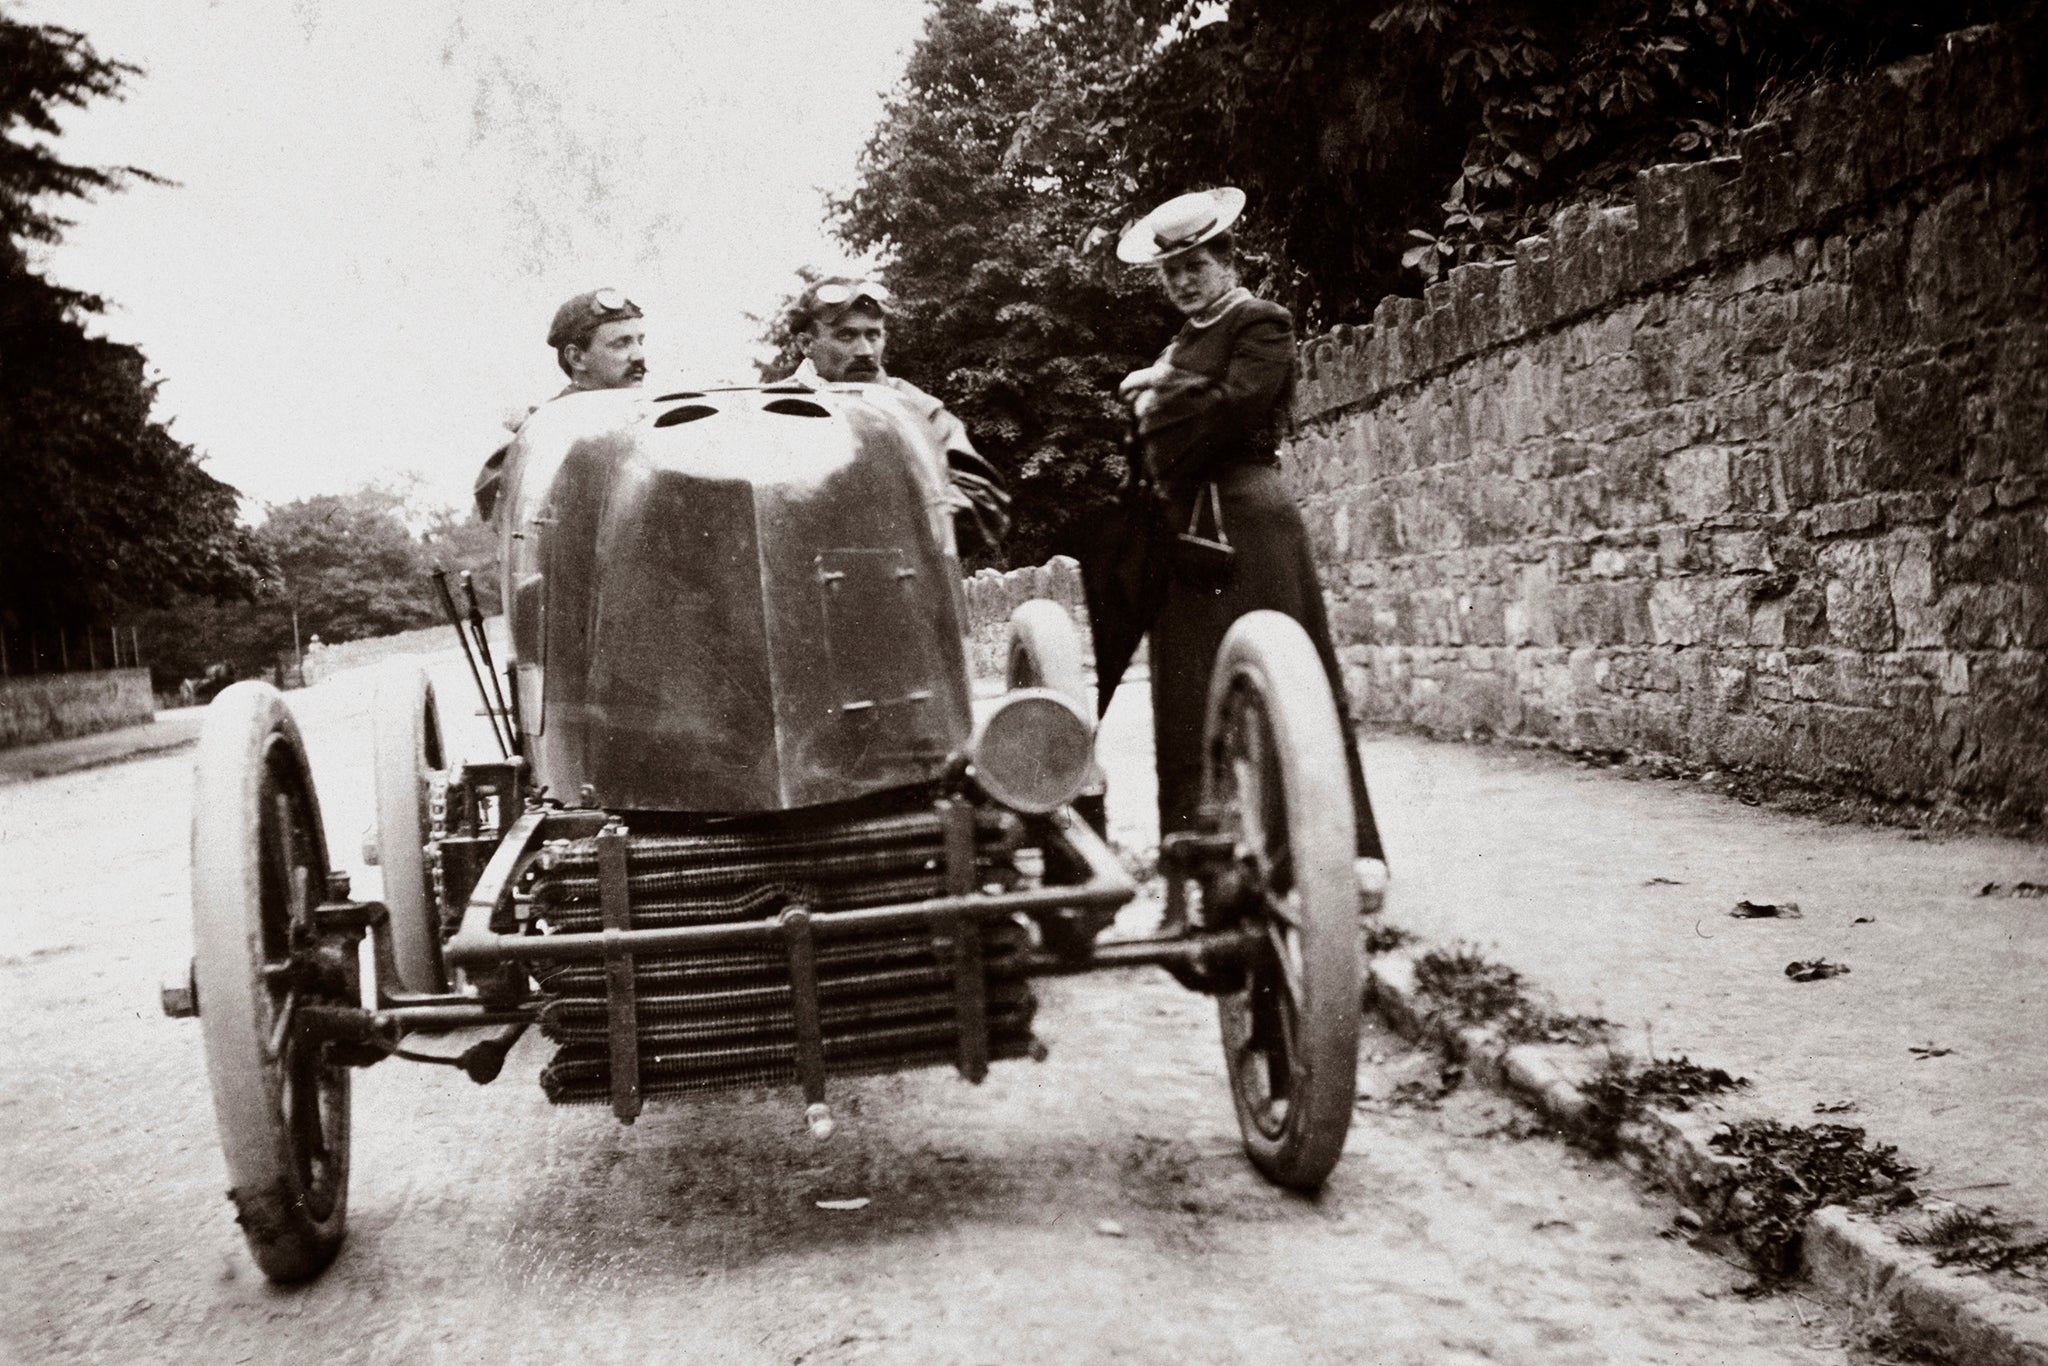 IRELAND - JANUARY 10:  Photograph taken from an album of images compiled by English motor car manufacturer and aviator Charles Stewart Rolls (1877-1910). The prestigious Gordon Bennett Trophy race was first held in 1900. As the 1902 race had been won for Britain by S F Edge, the British had the honour of hosting the 1903 event, staging it at a circuit at Athy, in Ireland. Camille Jenatzy, a Belgian driving a Mercedes for Germany, completed the 327 miles in 6 hours 39 minutes, winning by over 11 minutes; Gabriel finished fourth for France. Rolls was himself a well known competitor on the motor racing circuit at the time. He failed to gain selection for the 1903 Gordon Bennett, coming second in an elimination trial held on the Duke of Portland�s estate at Welbeck, Nottinghamshire.  (Photo by SSPL/Getty Images)